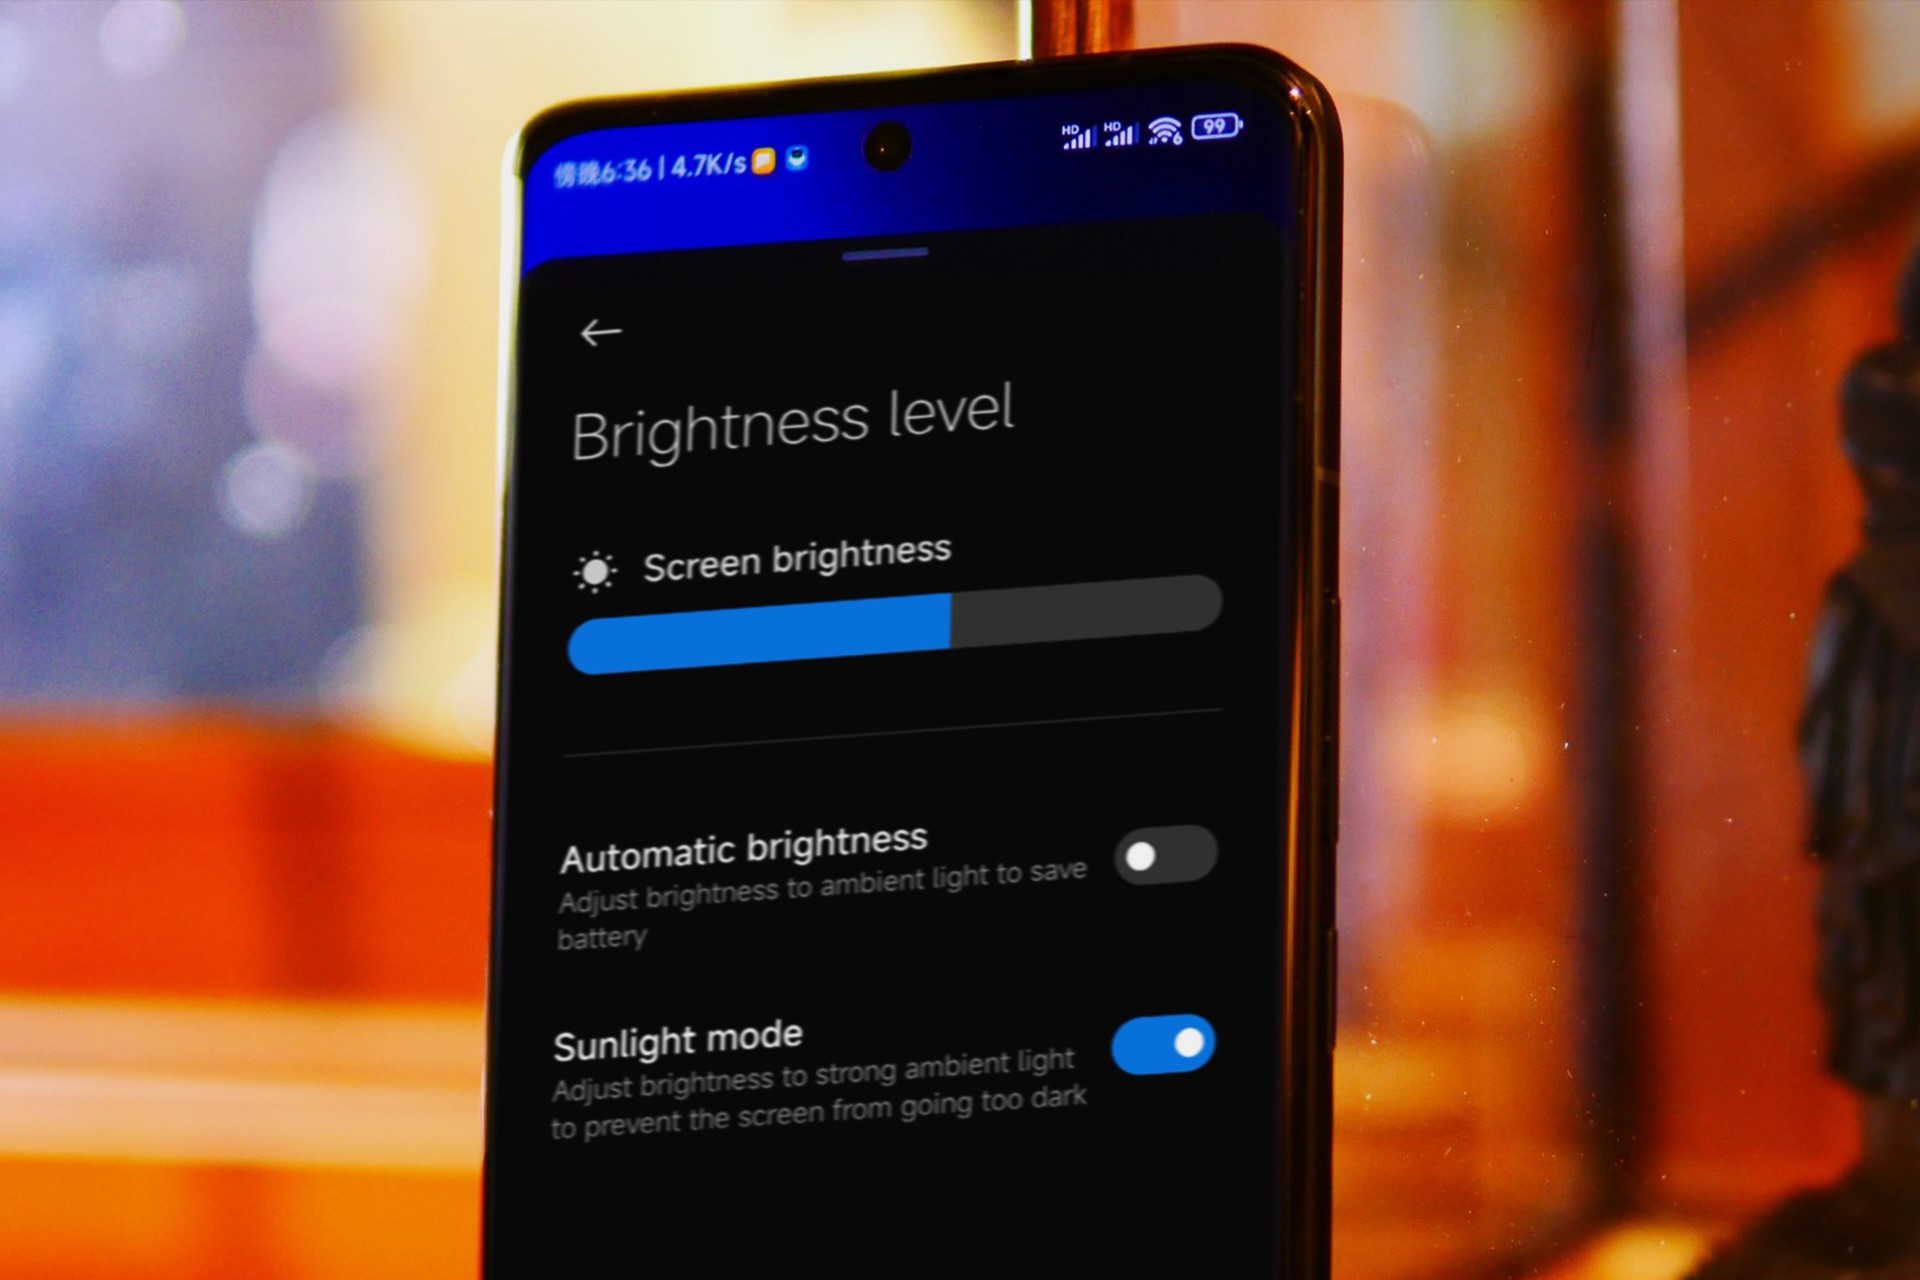 xiaomi-monitor-brightness-adjustment-step-by-step-guide